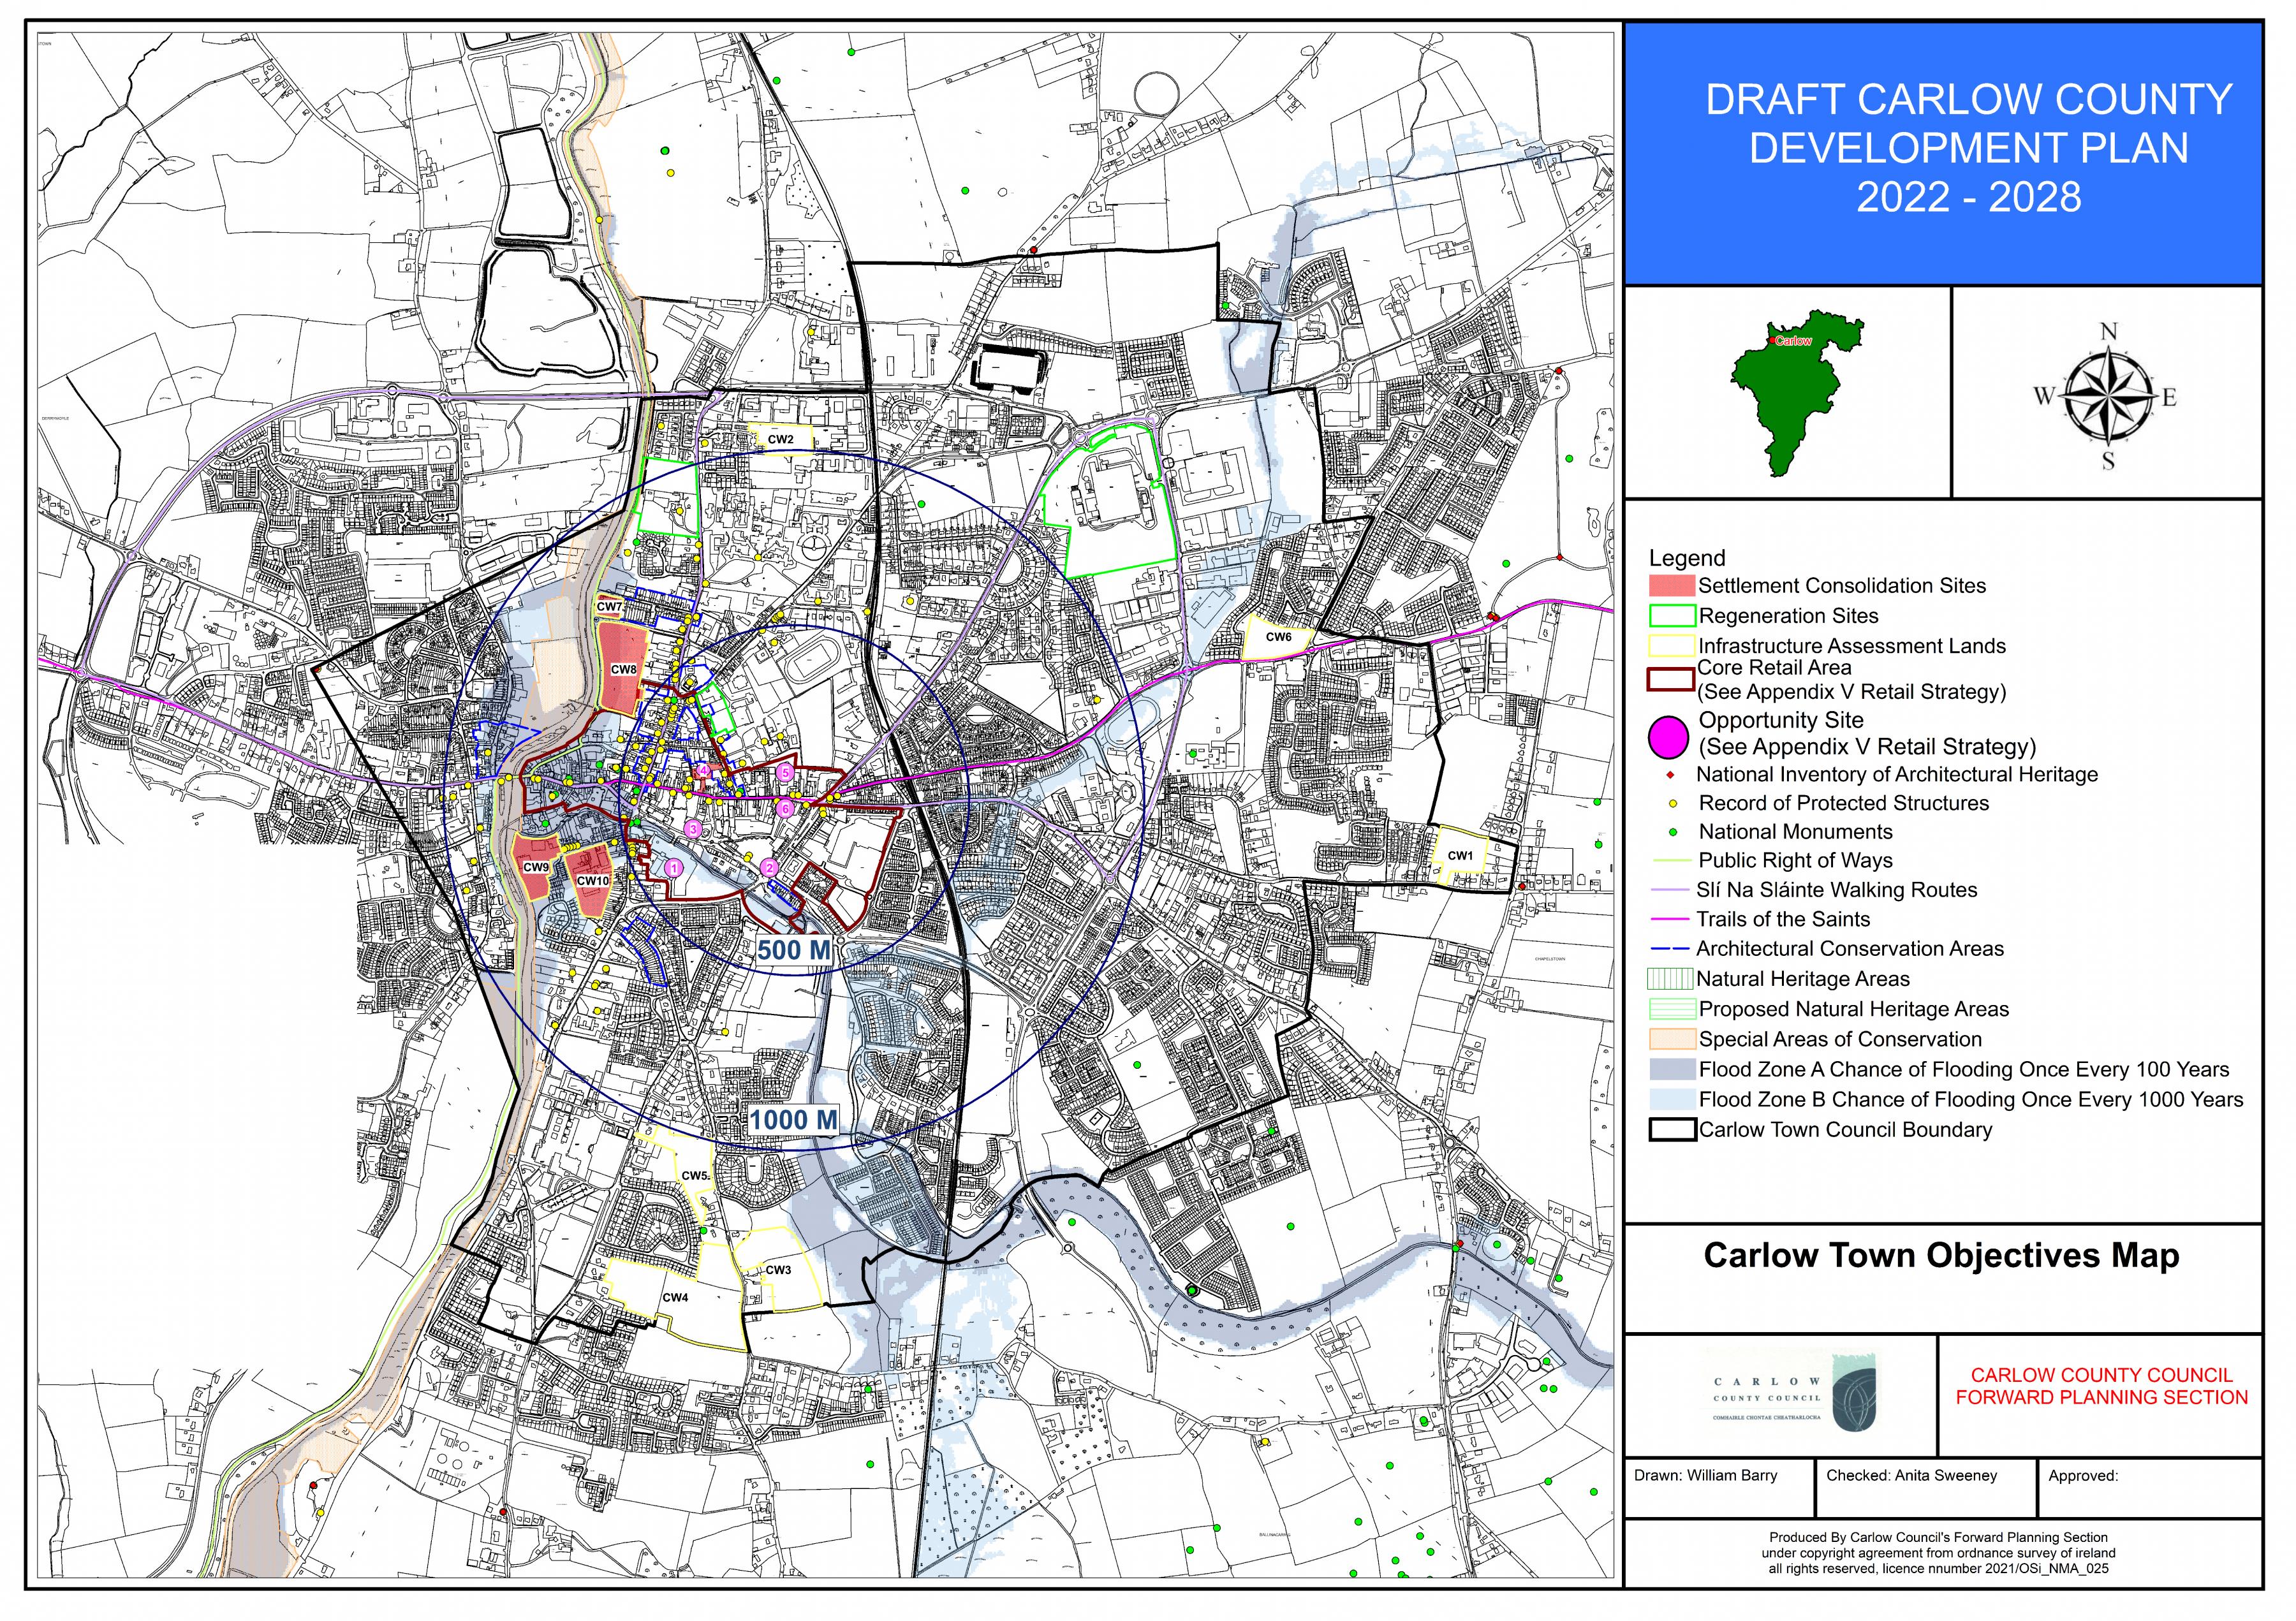 Carlow Town Objectives Map